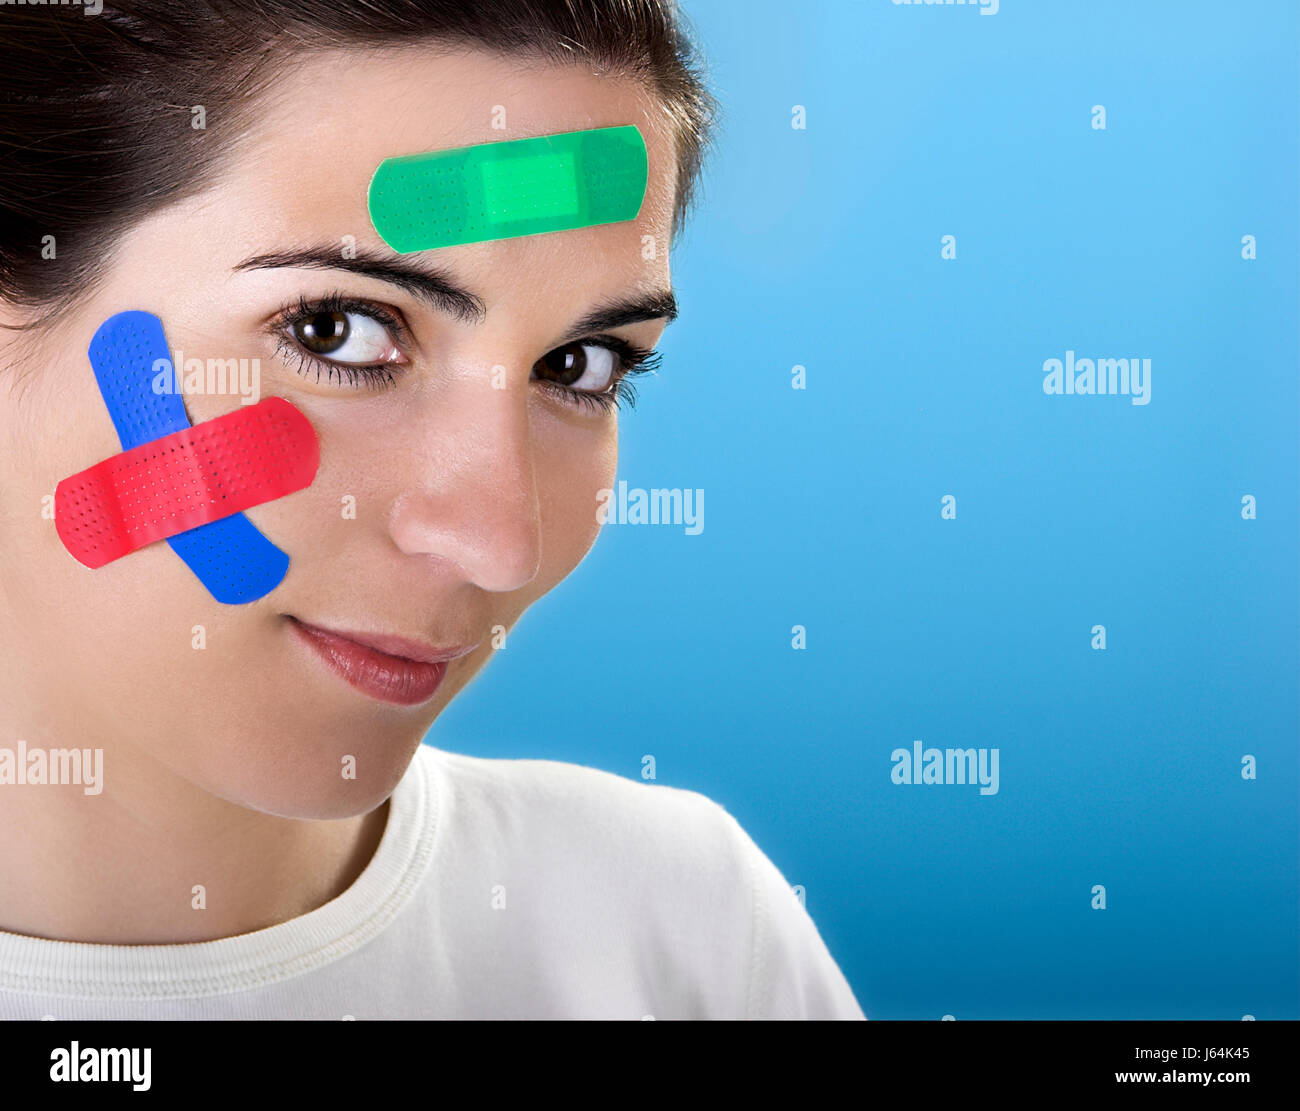 woman accident protect protection funny treatment adhesive surgery blue Stock Photo